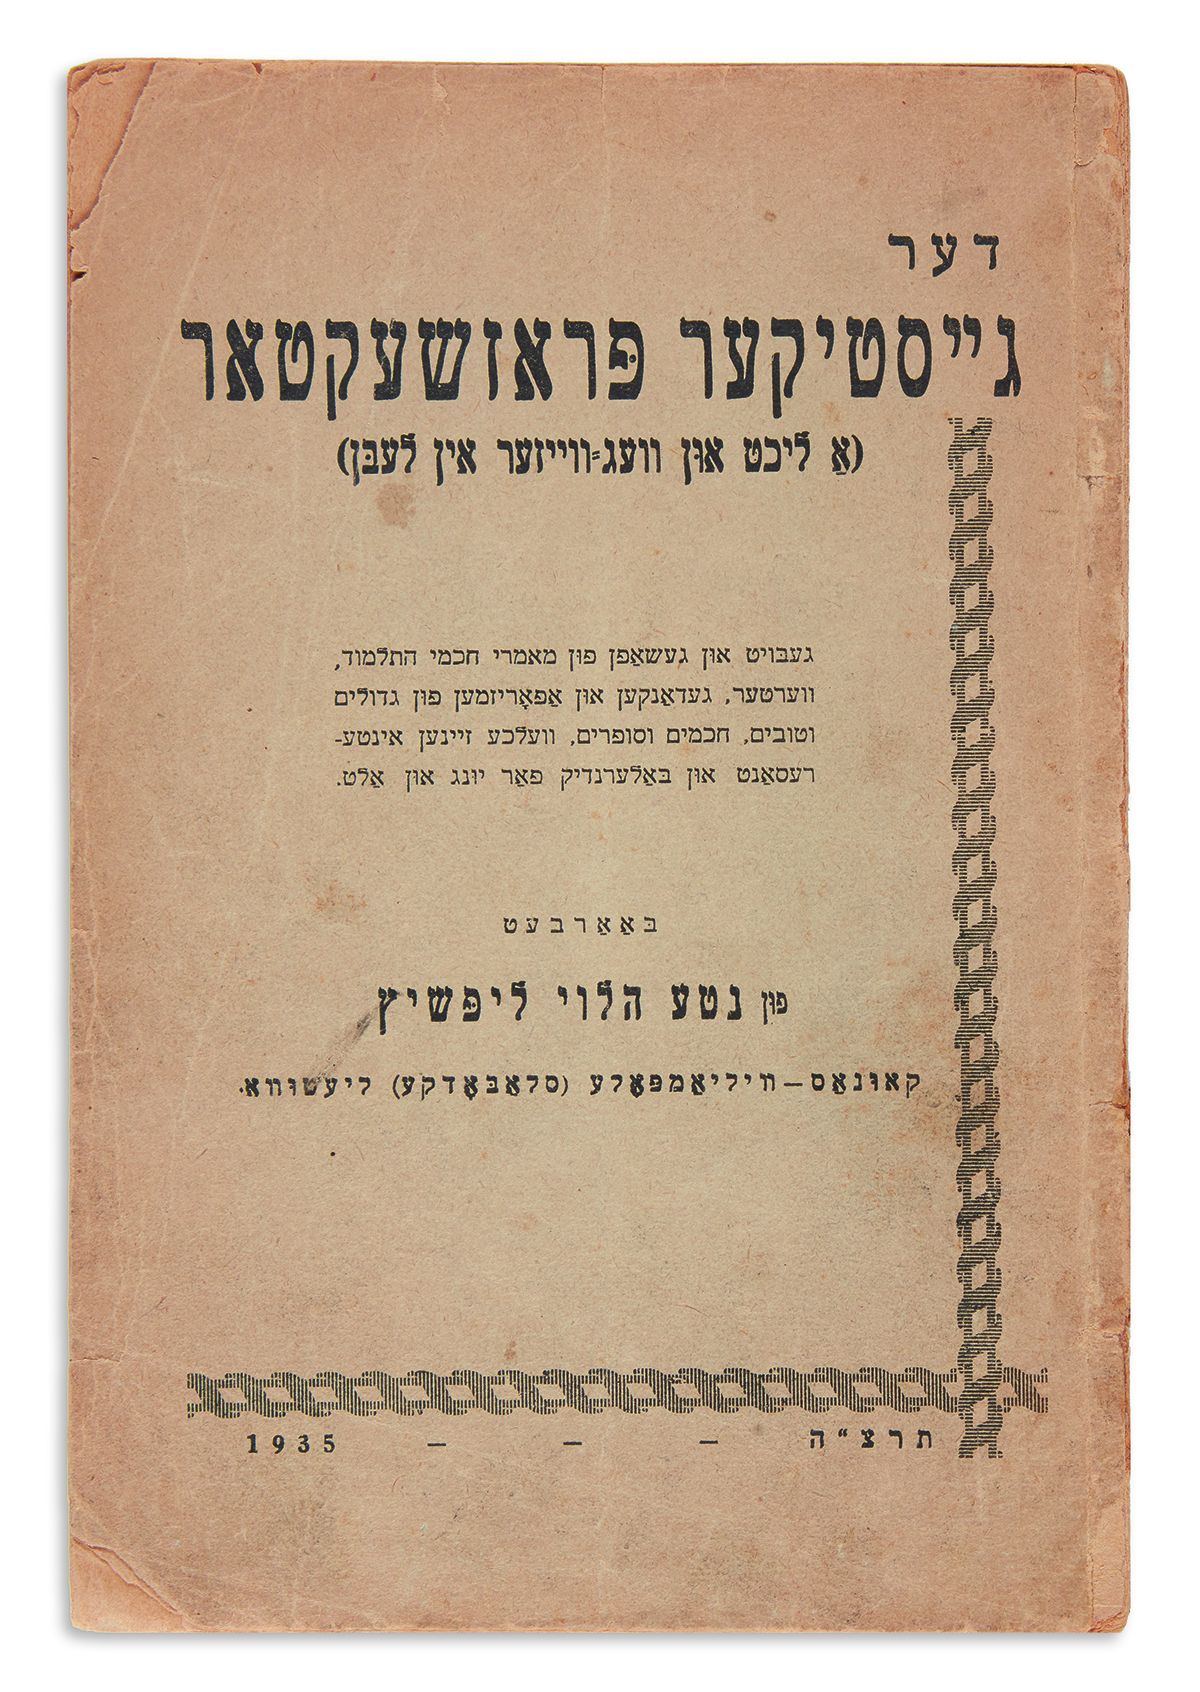 Nota HaLevi Lipschitz. Der Geistiker Projector [Talmudic aphorisms translated and explained in rhyme].